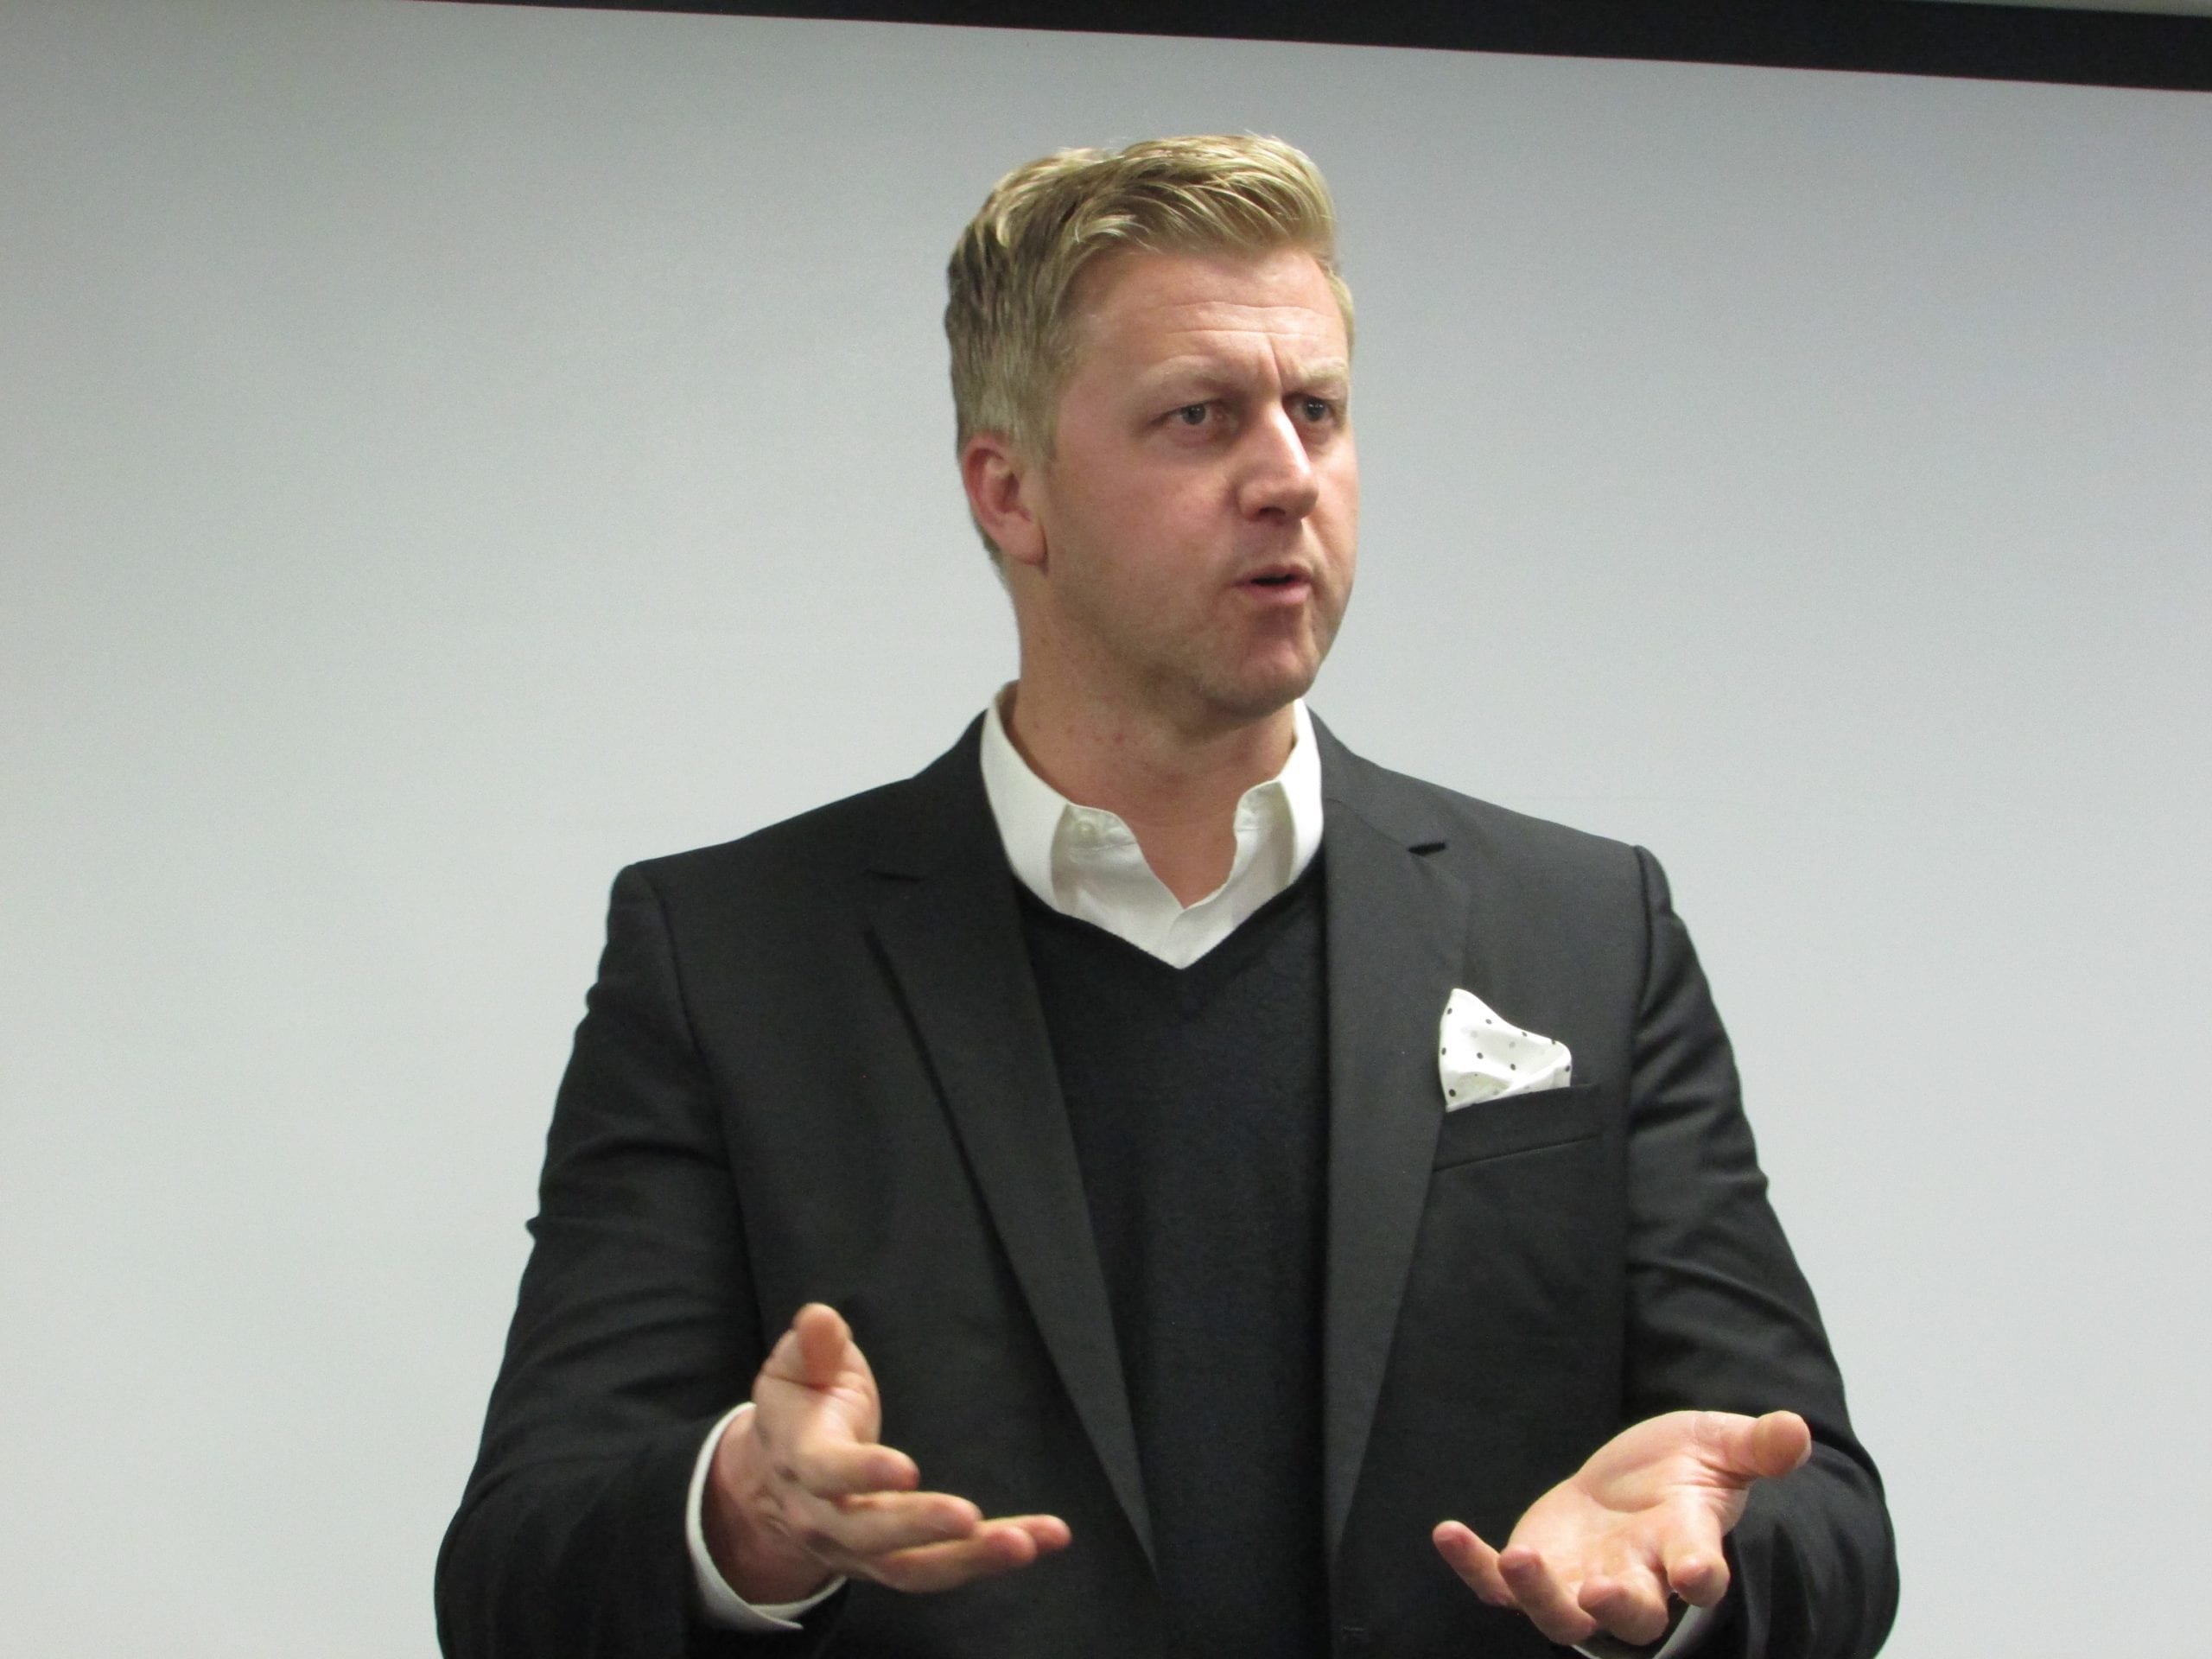 Gareth Cliff, co-CEO and co-founder of CliffCentral